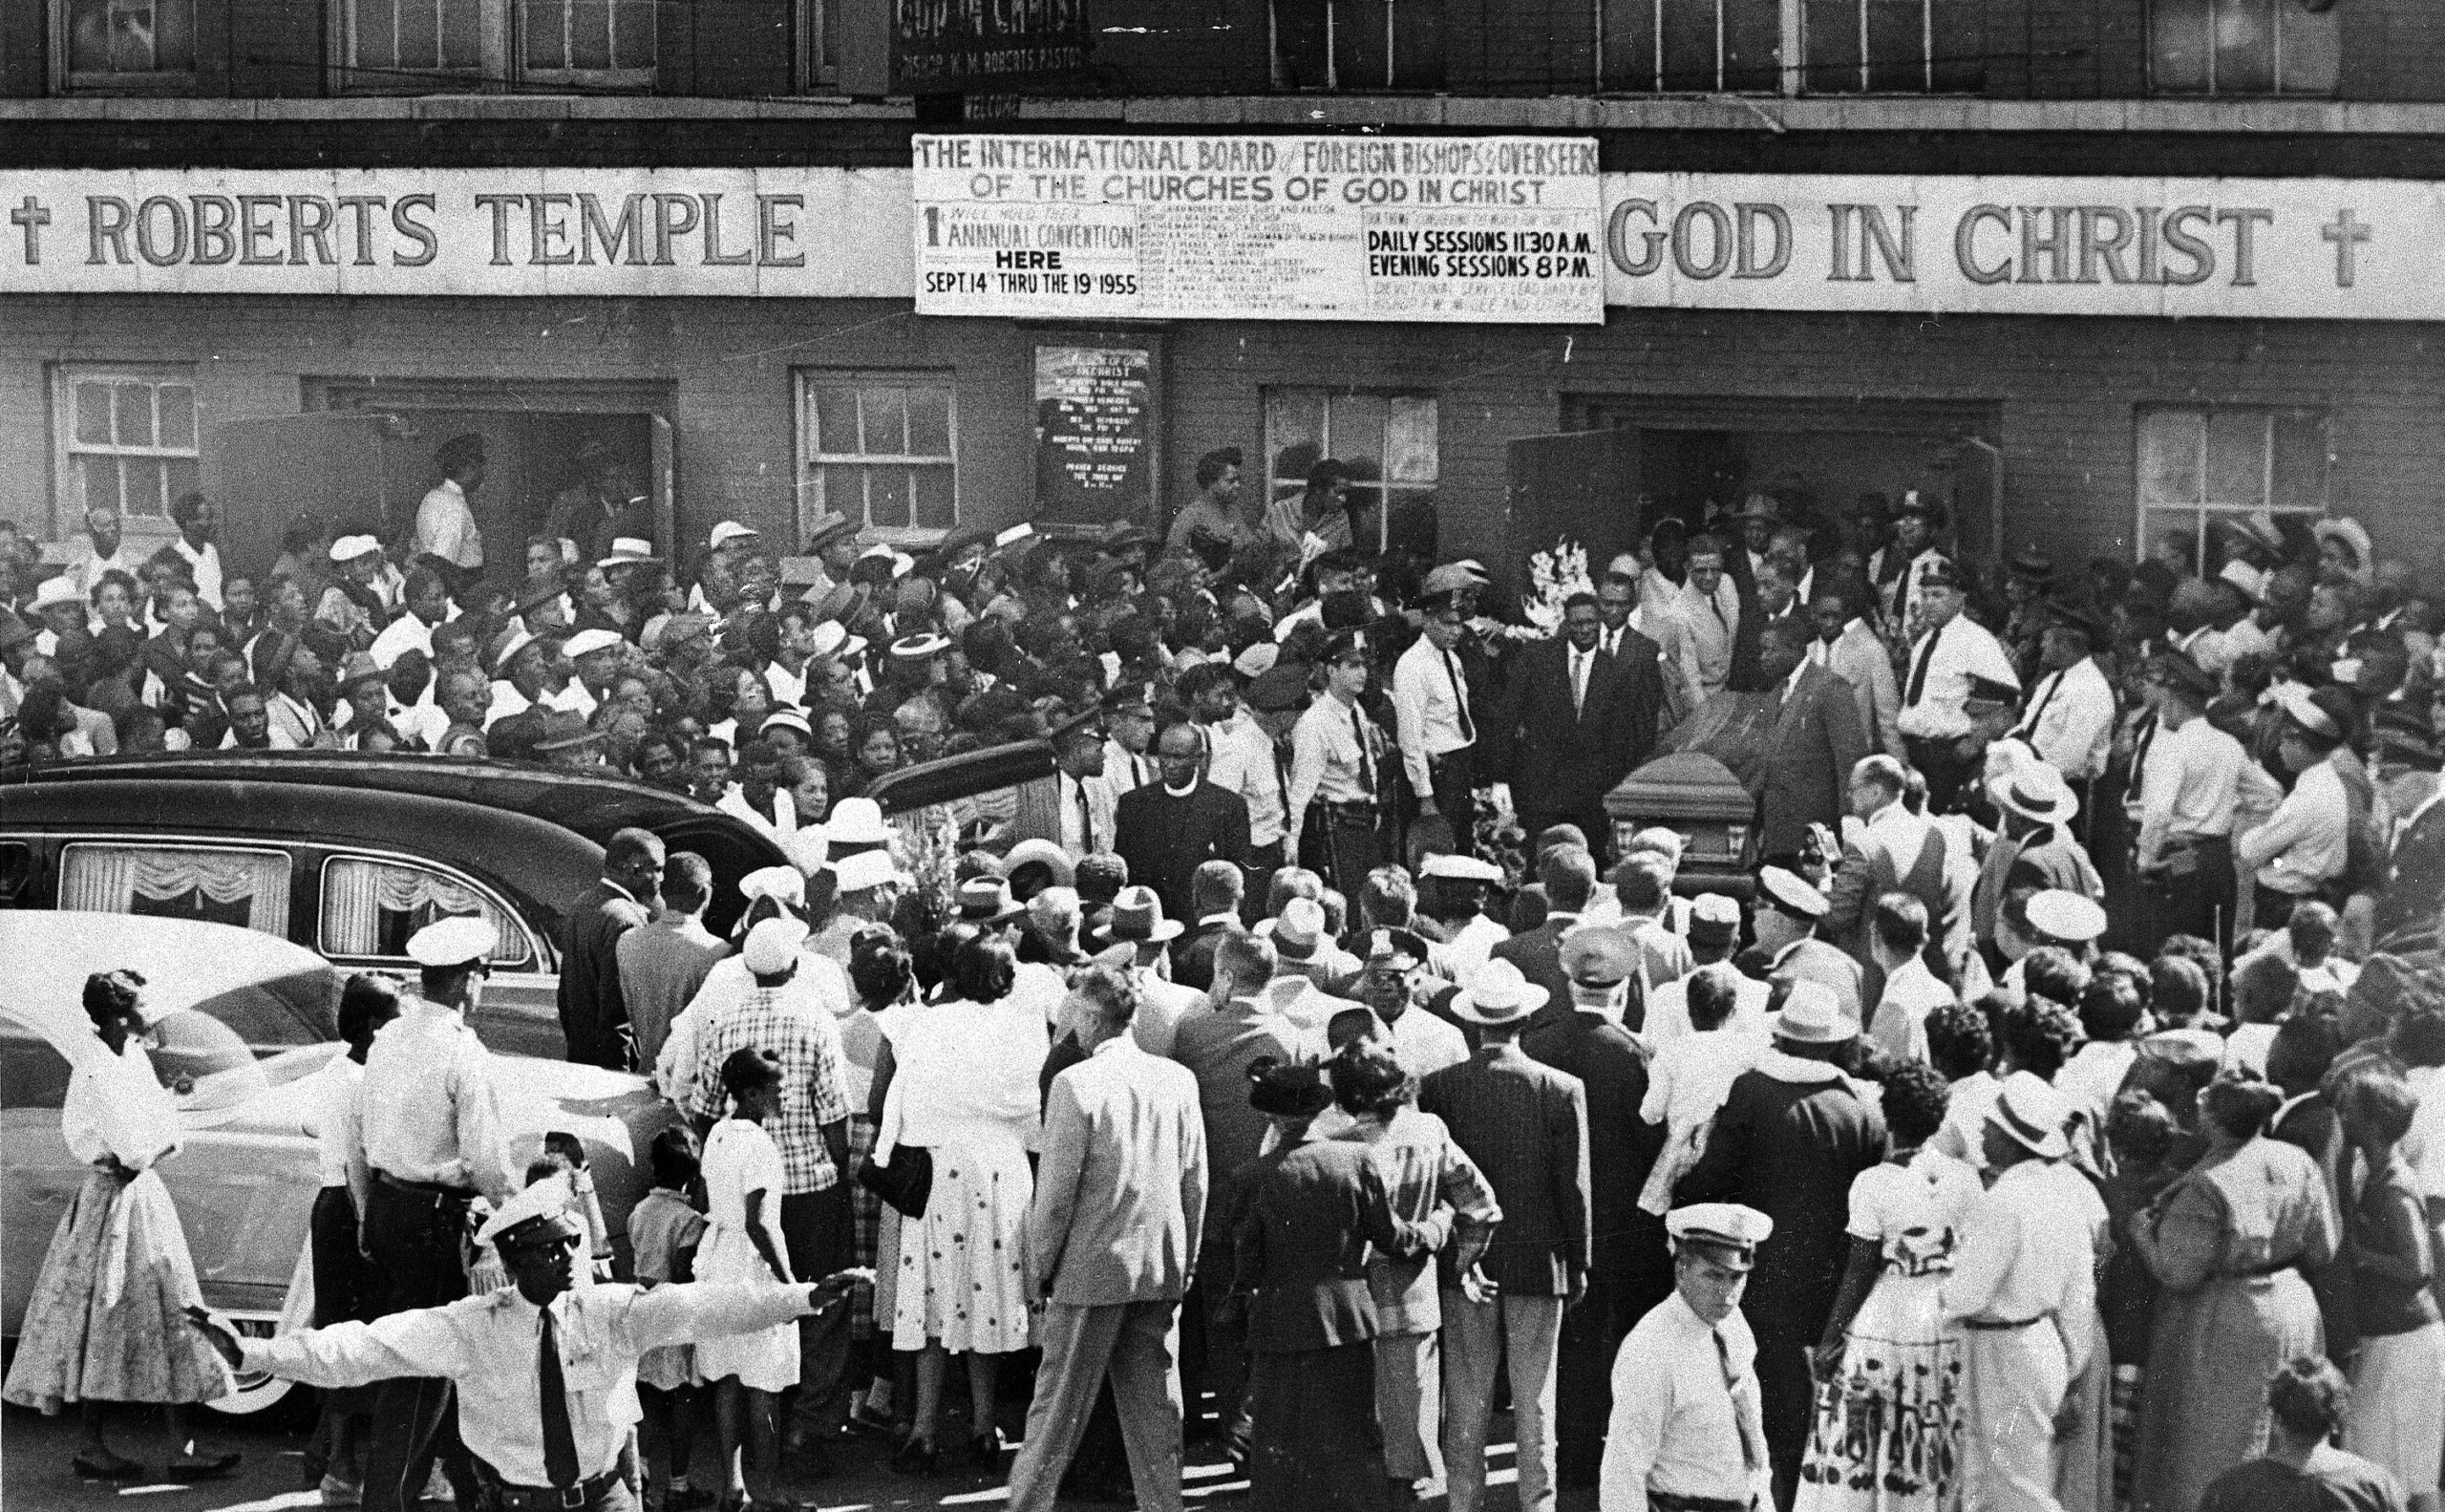 A large crowd gathers outside the Roberts Temple Church of God In Christ in Chicago, Ill.,  Sept. 6, 1955 as pallbearers carry the casket of Emmett Till, a 14-year-old African-American boy who was slain while on a visit to Mississippi. Police estimate a crowd of about 2,000.  (AP Photo)